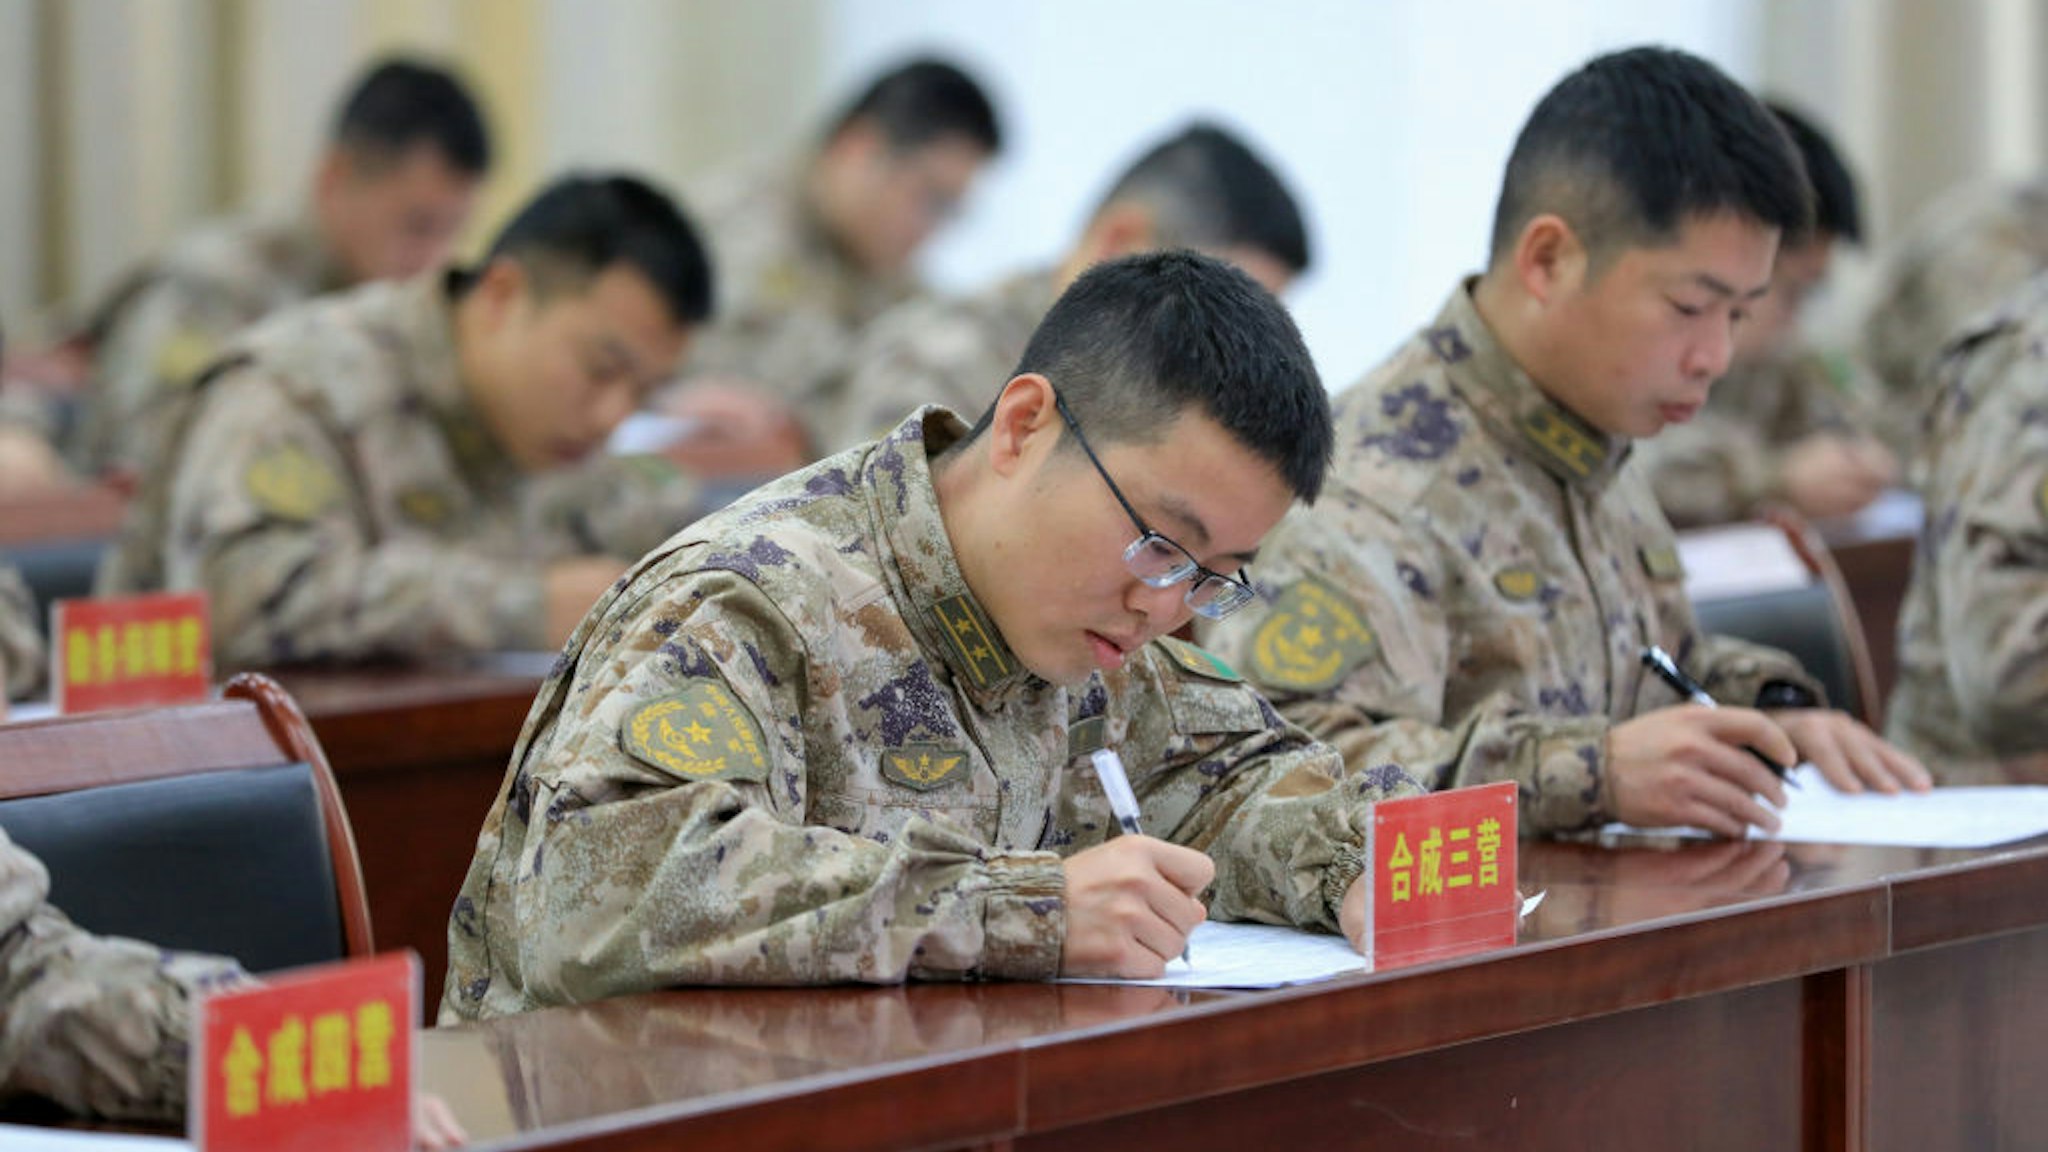 JIANGXI, CHINA - JANUARY 26, 2023 - A brigade of the 72nd Group Army held queue exercises, rules and regulations examination and other activities to test the officers and soldiers' queue literacy and knowledge of laws and regulations, and strengthen the regularized management of the army. January 26, 2023, Jiangxi Province, China. (Photo credit should read CFOTO/Future Publishing via Getty Images)